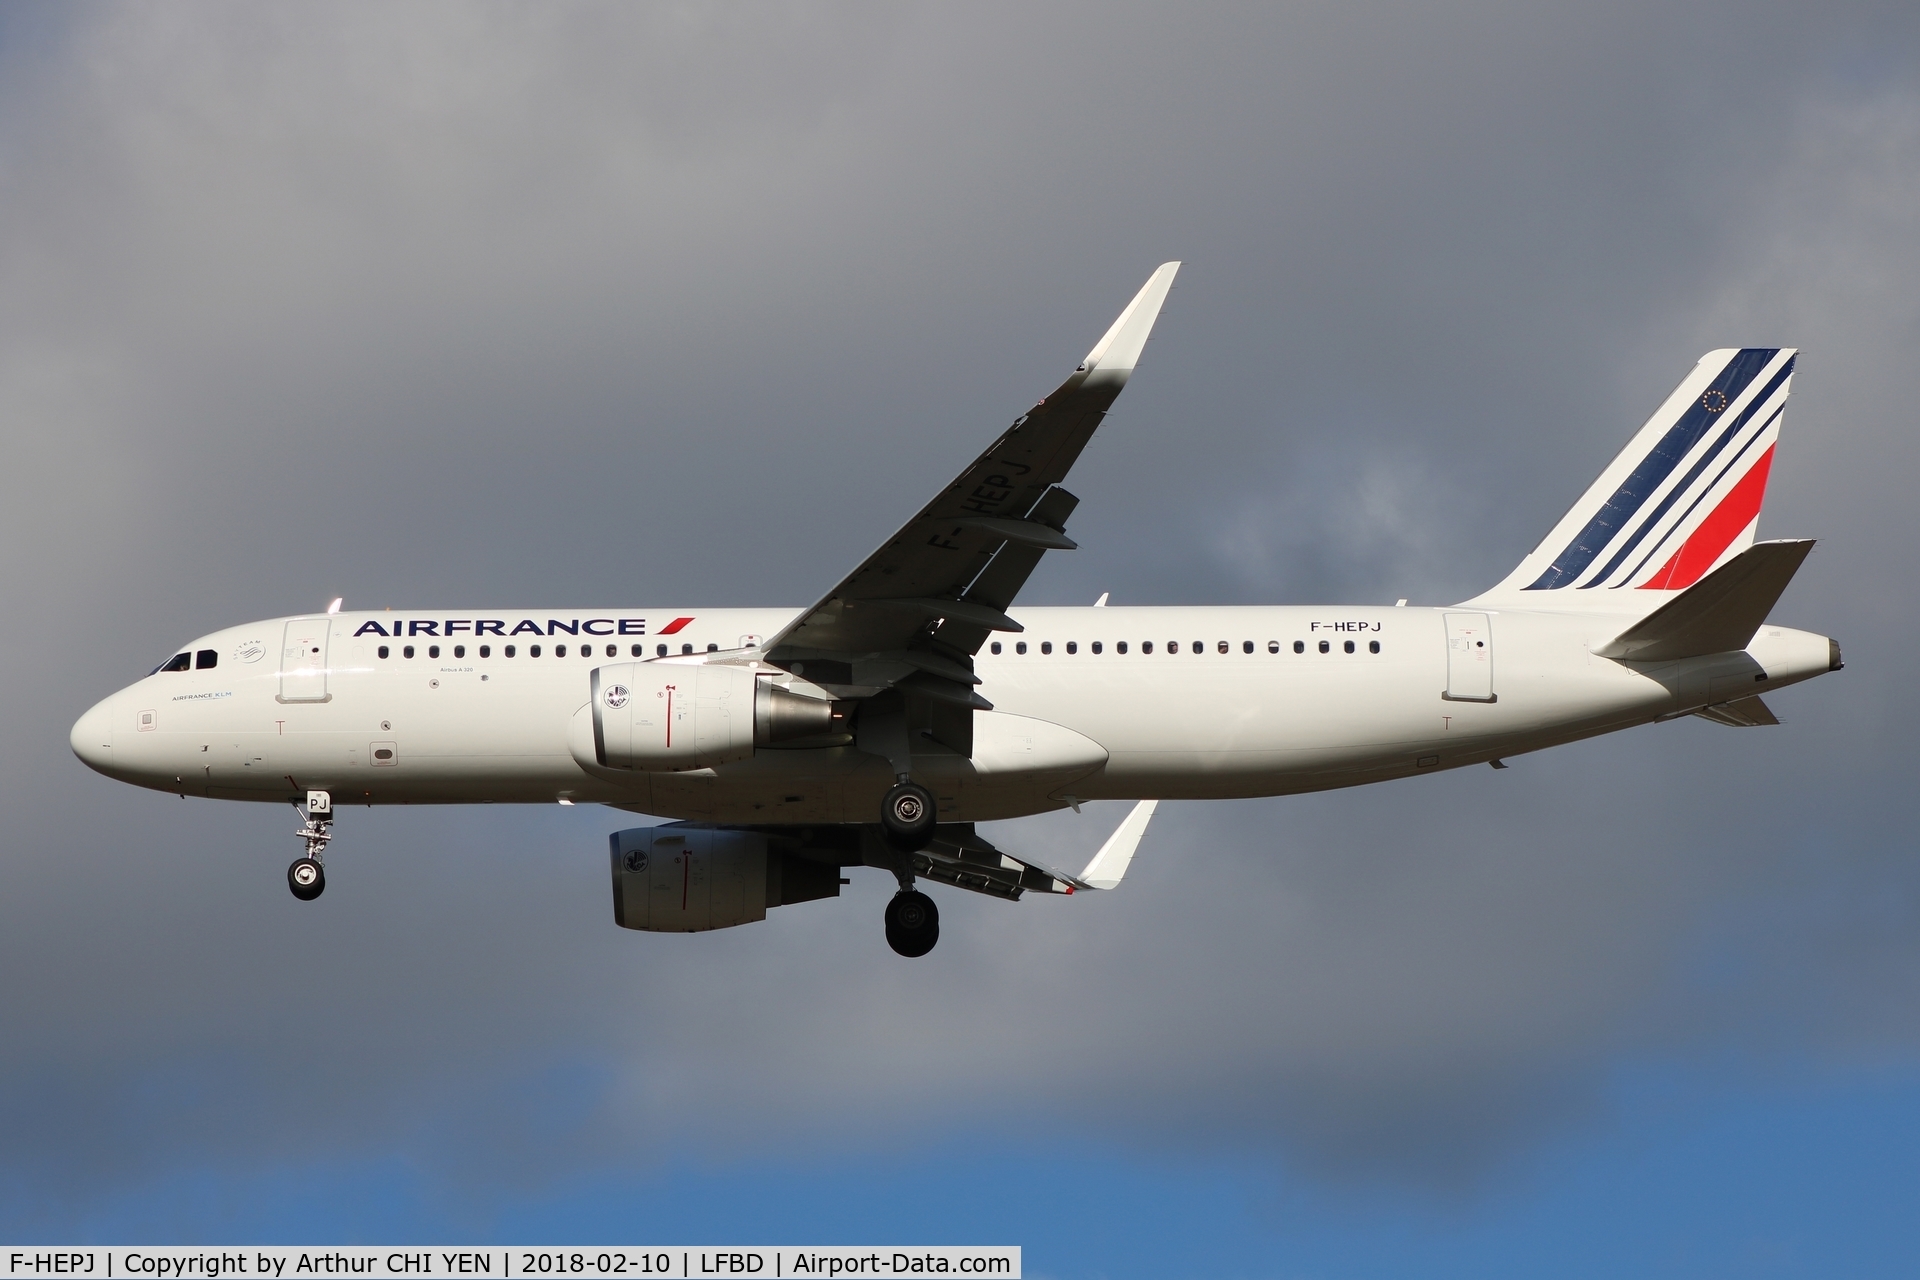 F-HEPJ, 2017 Airbus A320-214 C/N 7873, Air France flight from CDG